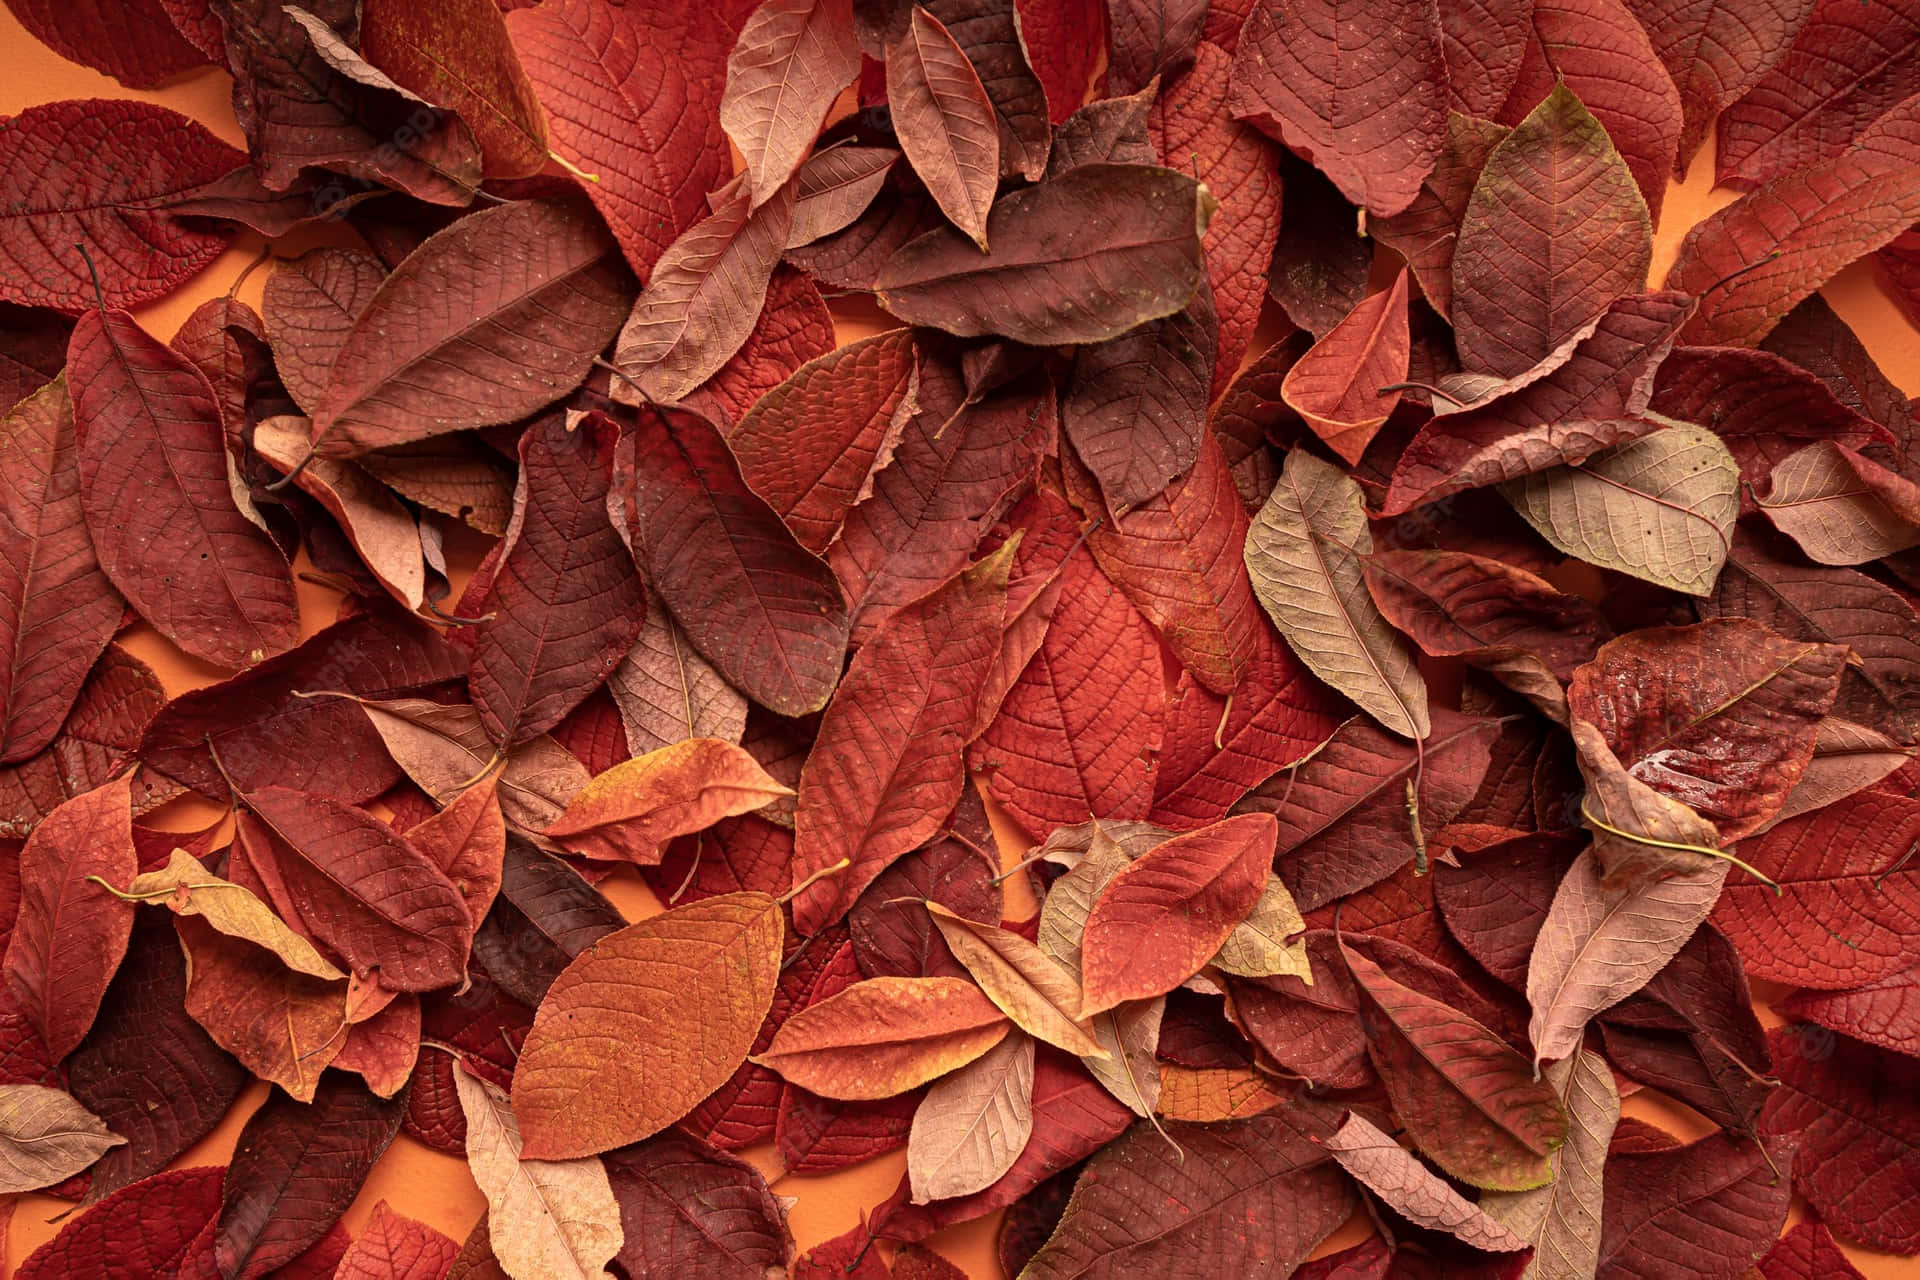 Enjoy the colors of fall and the new season with this stylish desktop background.